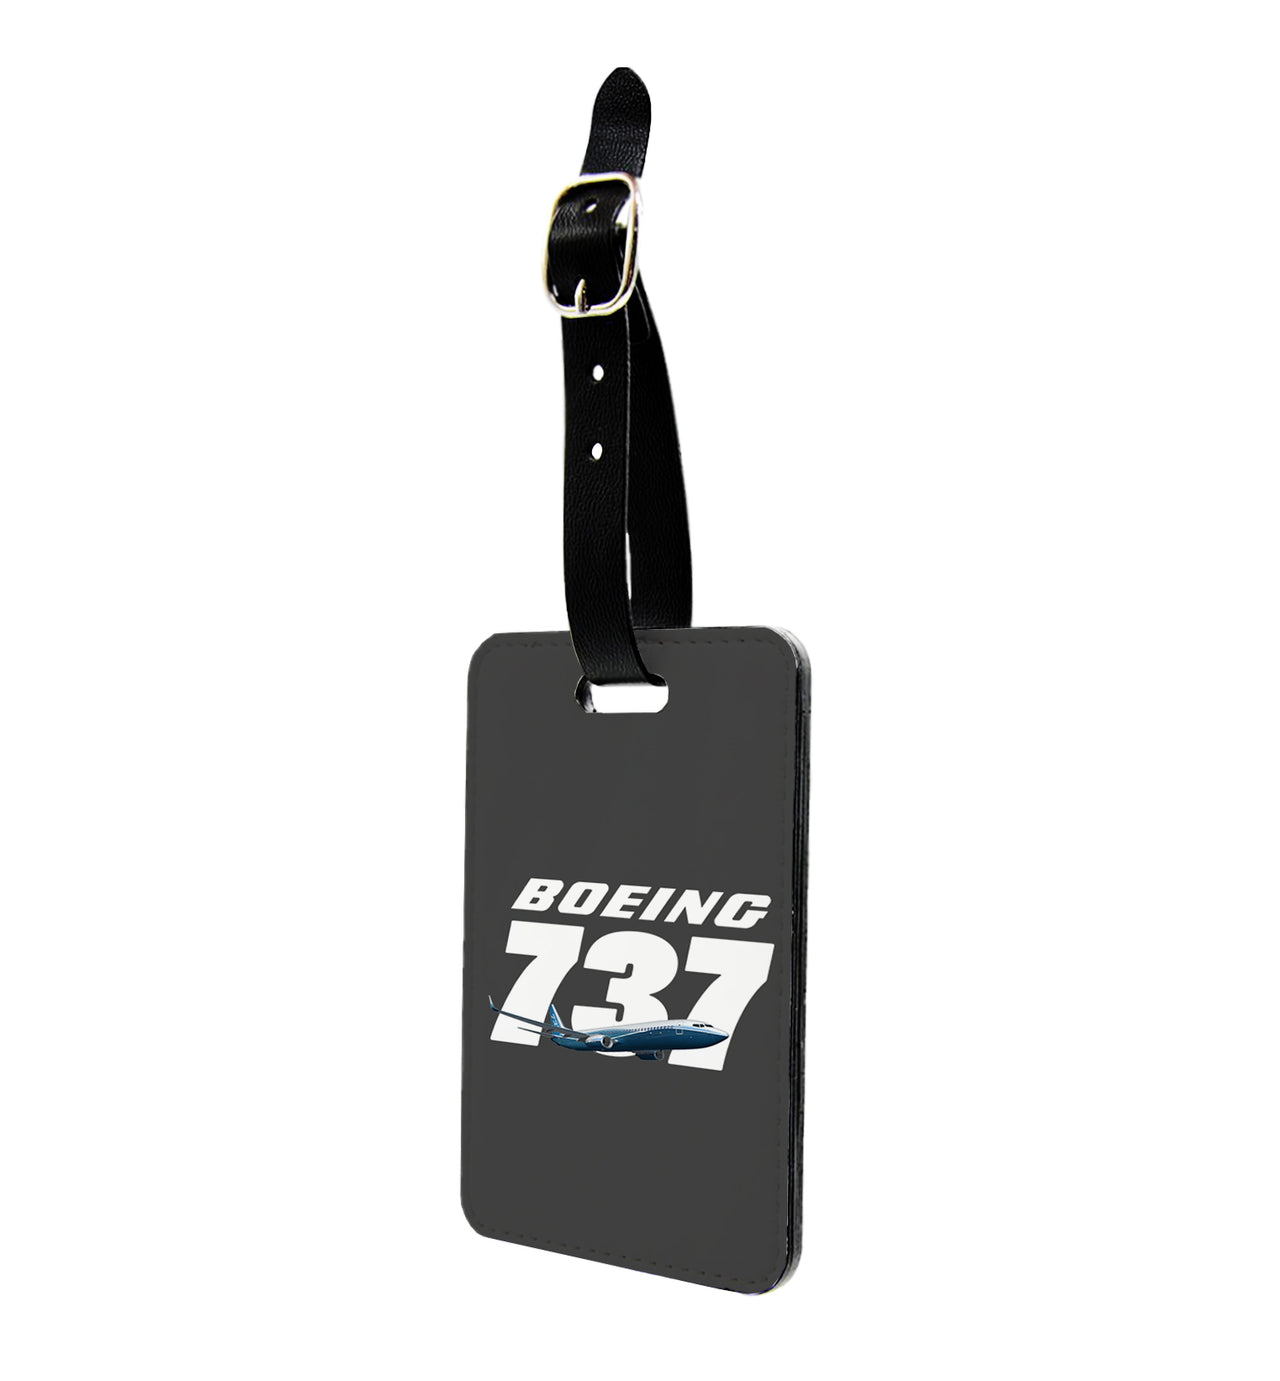 Super Boeing 737+Text Designed Luggage Tag